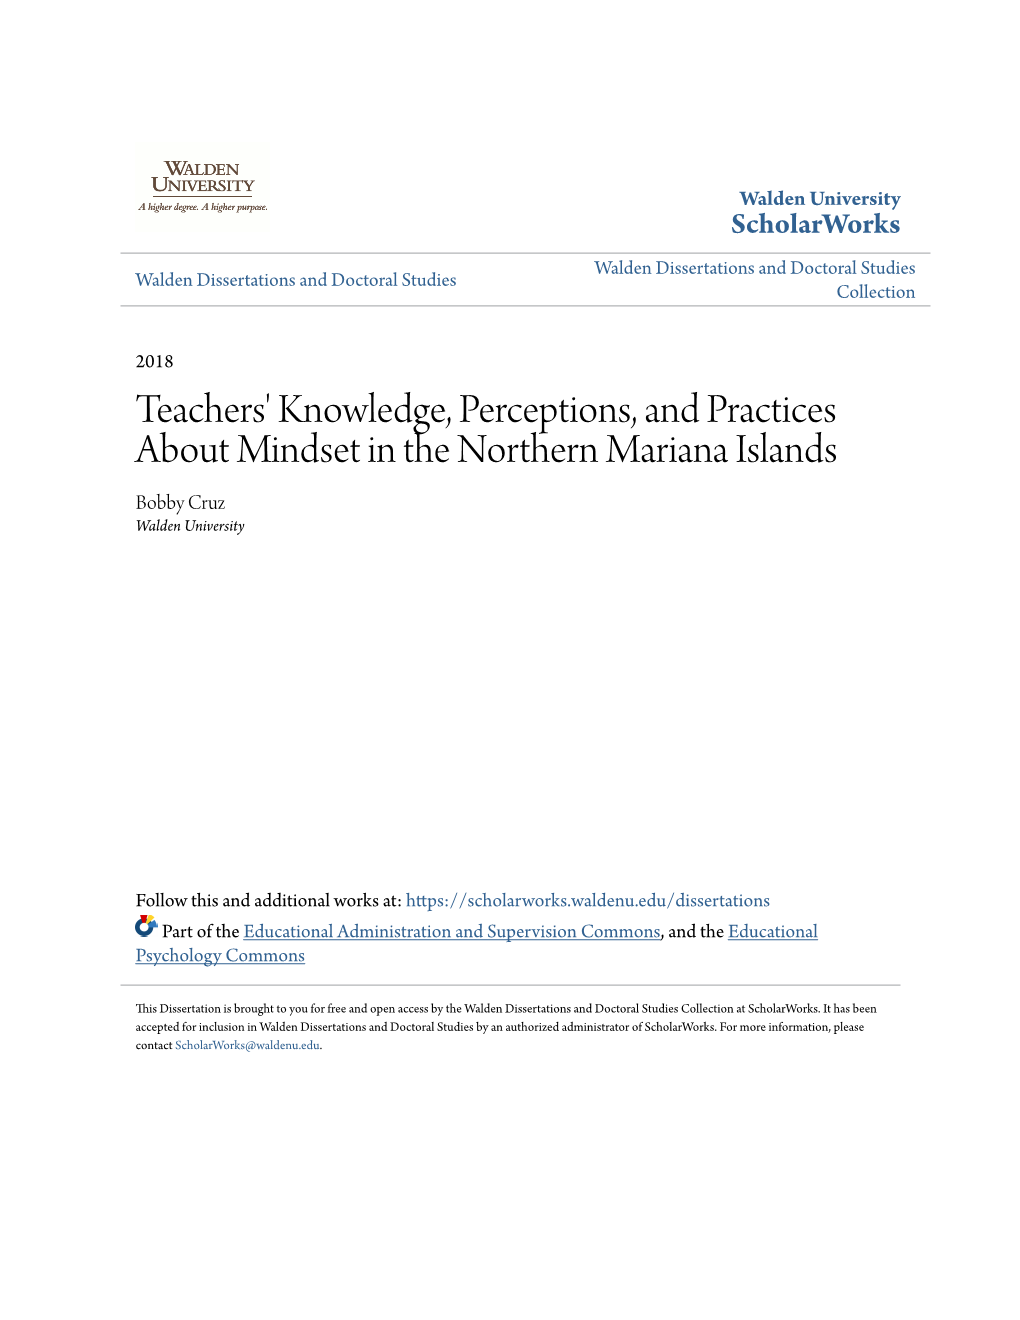 Teachers' Knowledge, Perceptions, and Practices About Mindset in the Northern Mariana Islands Bobby Cruz Walden University